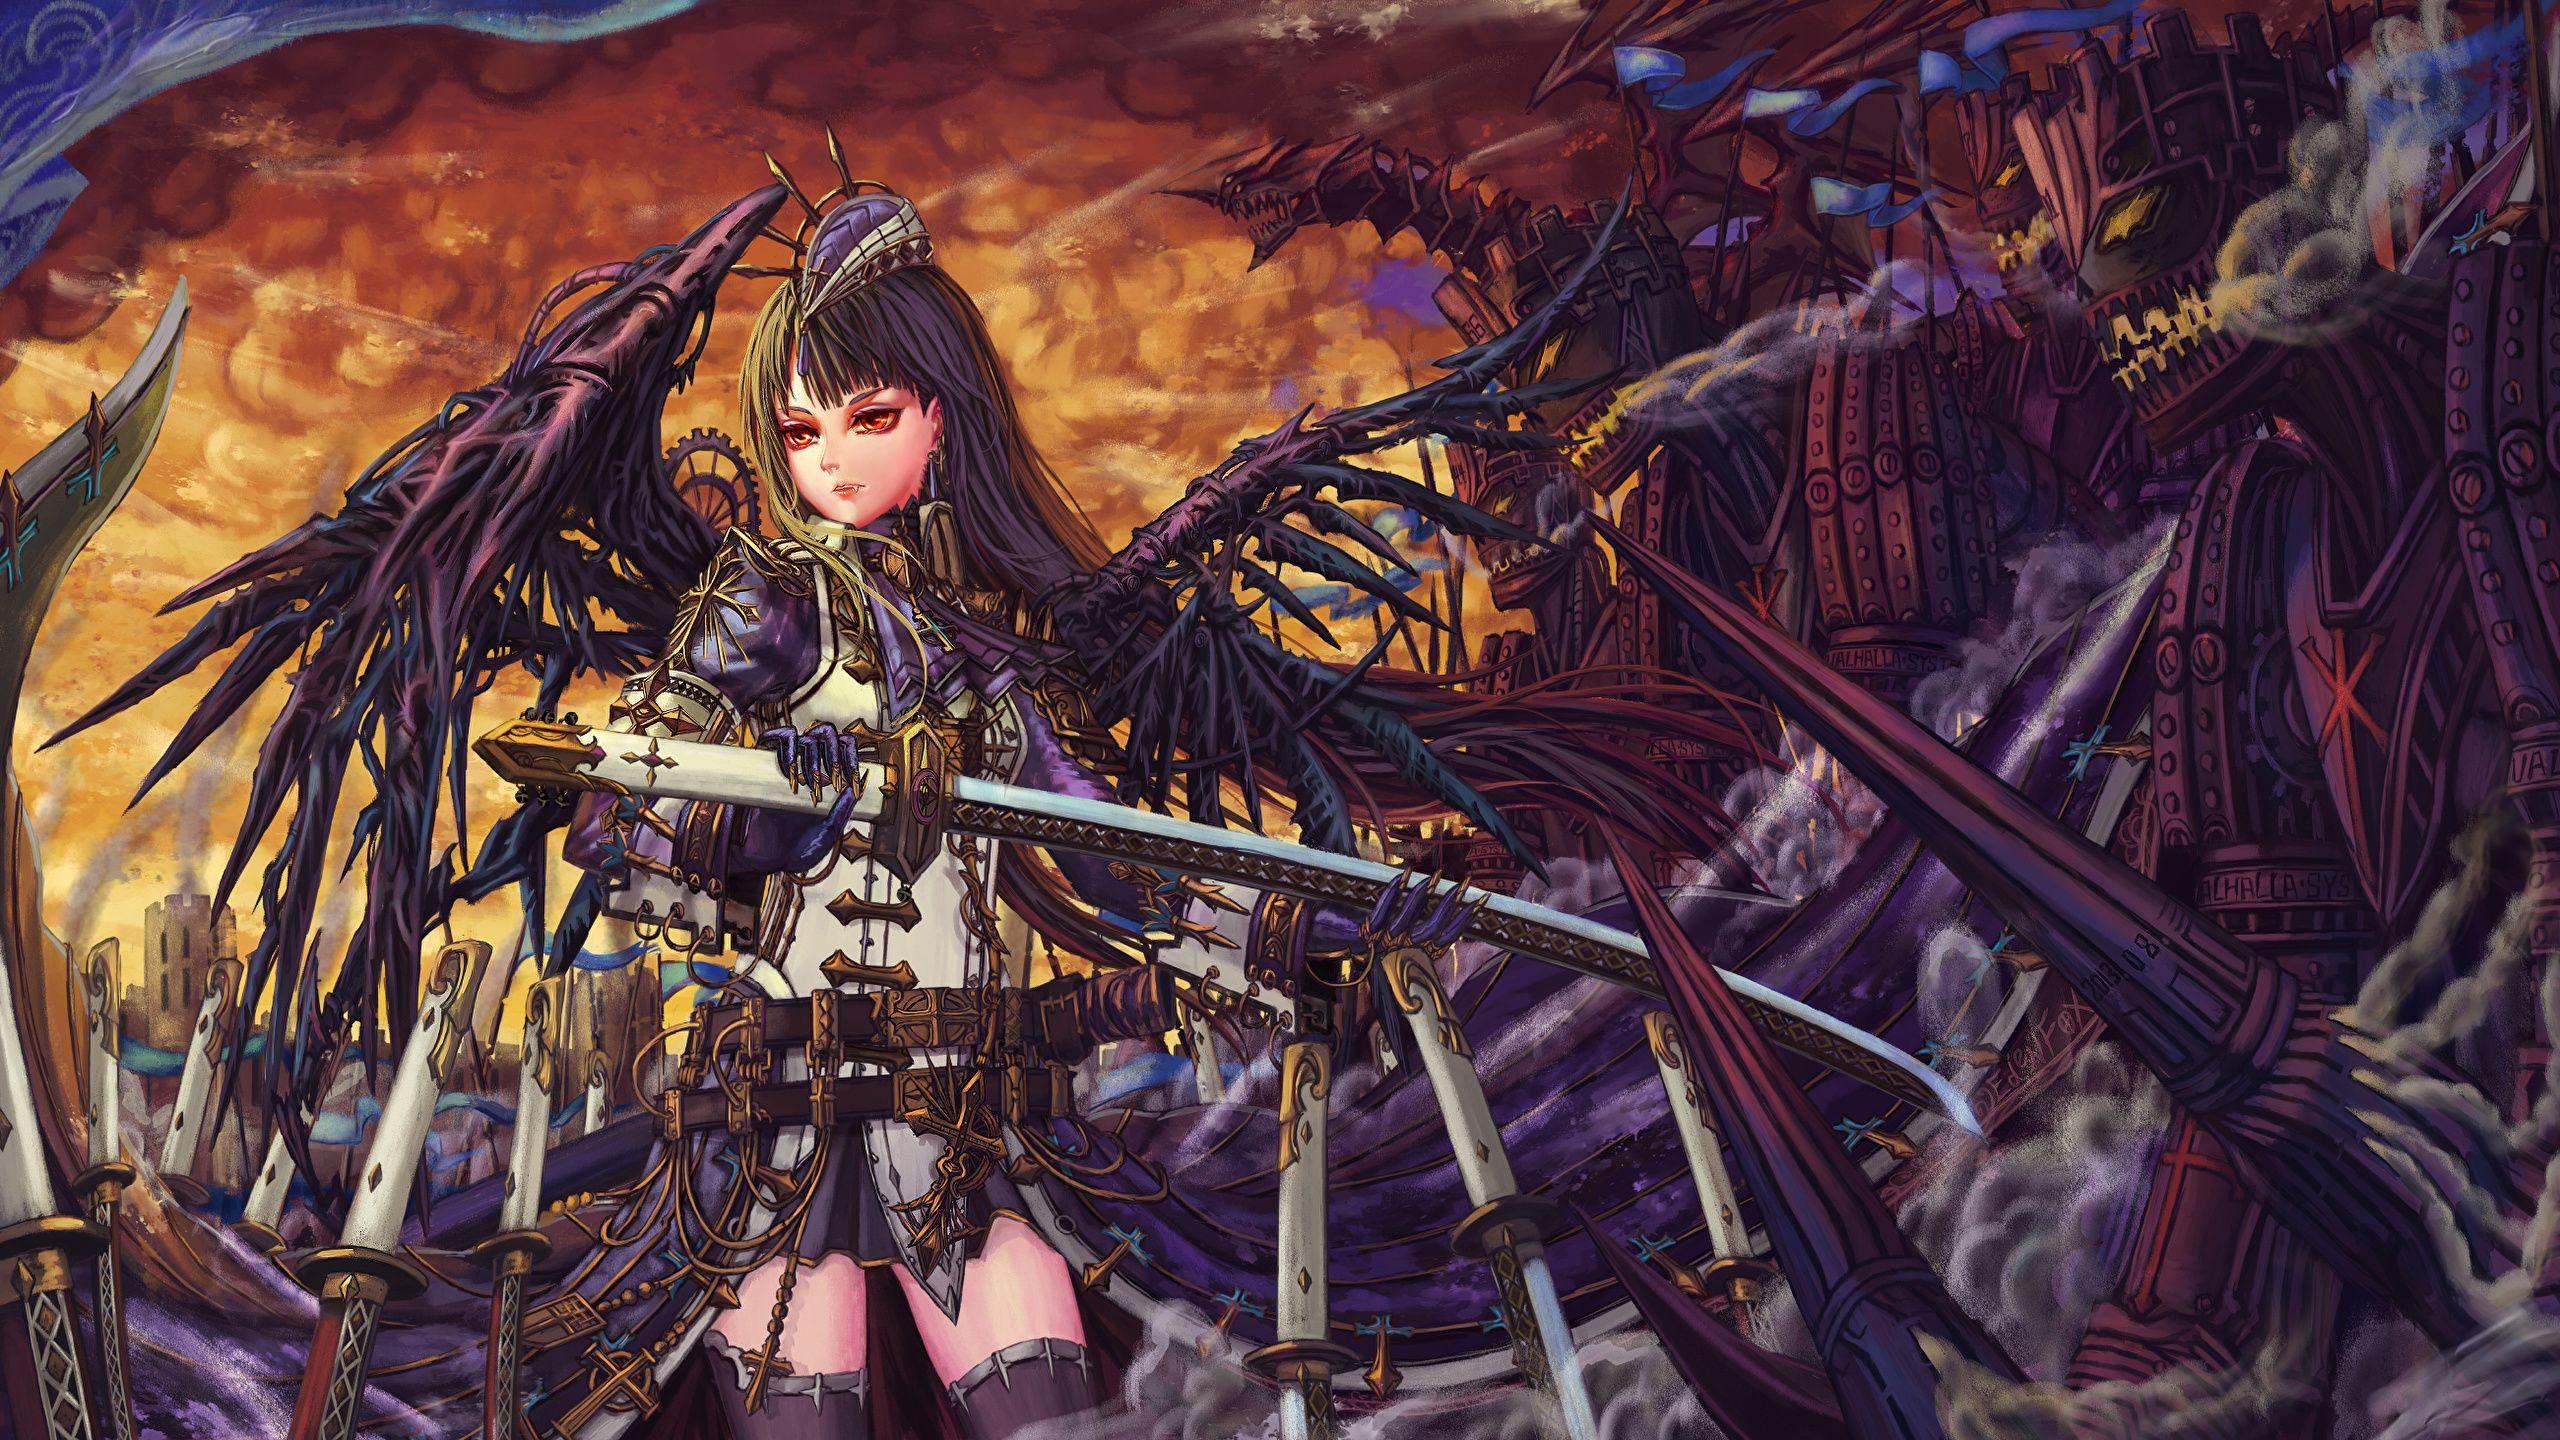 2560 x 1440 · jpeg - Anime Steampunk Wallpapers - Top Free Anime Steampunk Backgrounds ...